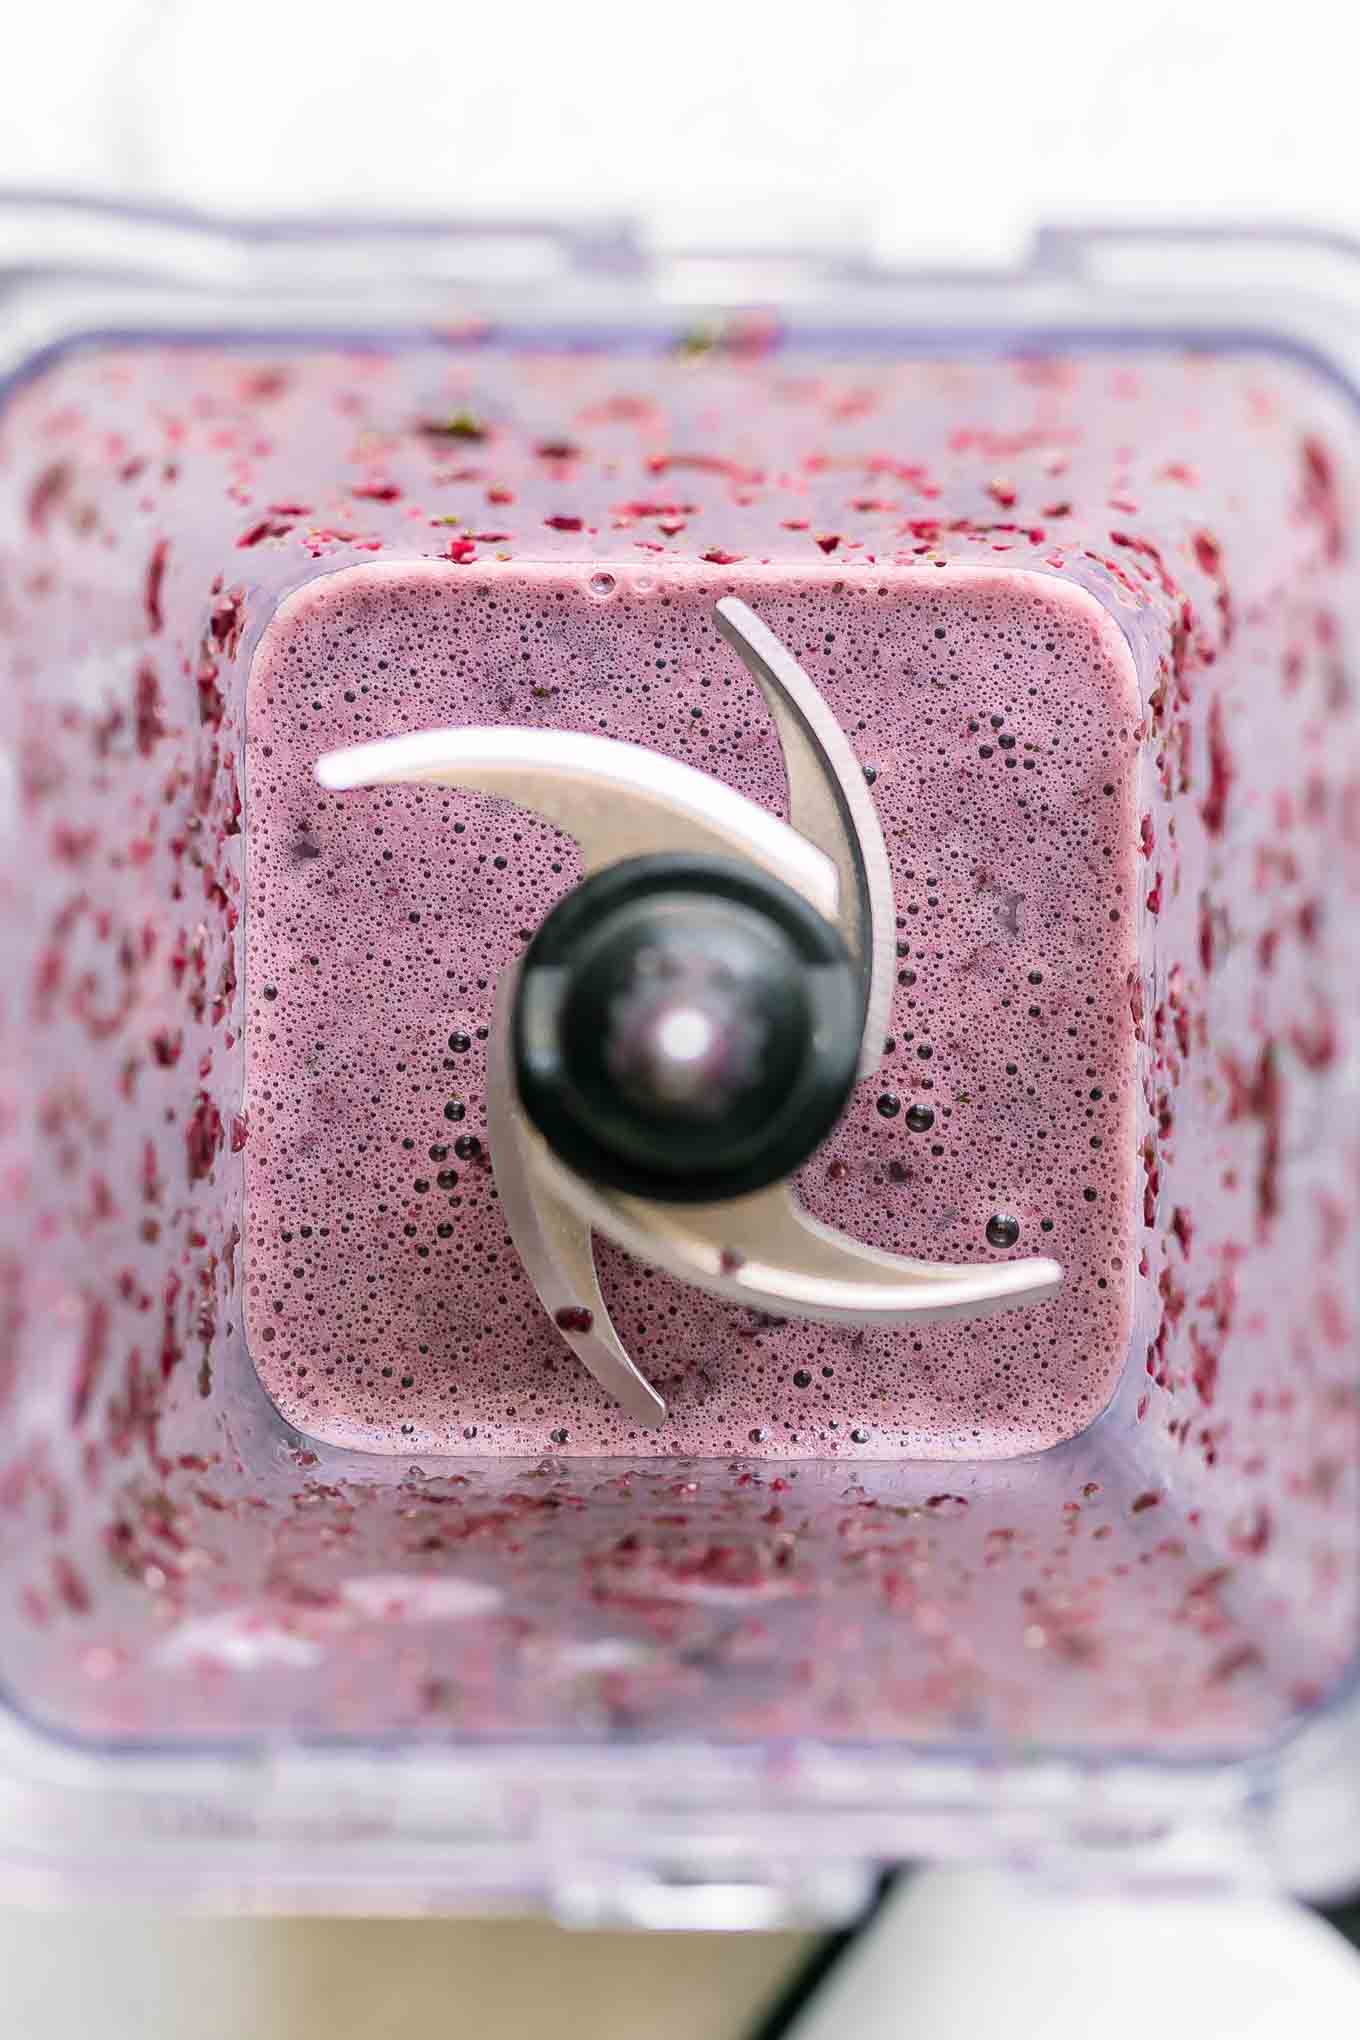 a purple spinach and cherry smooth inside a blender after blending